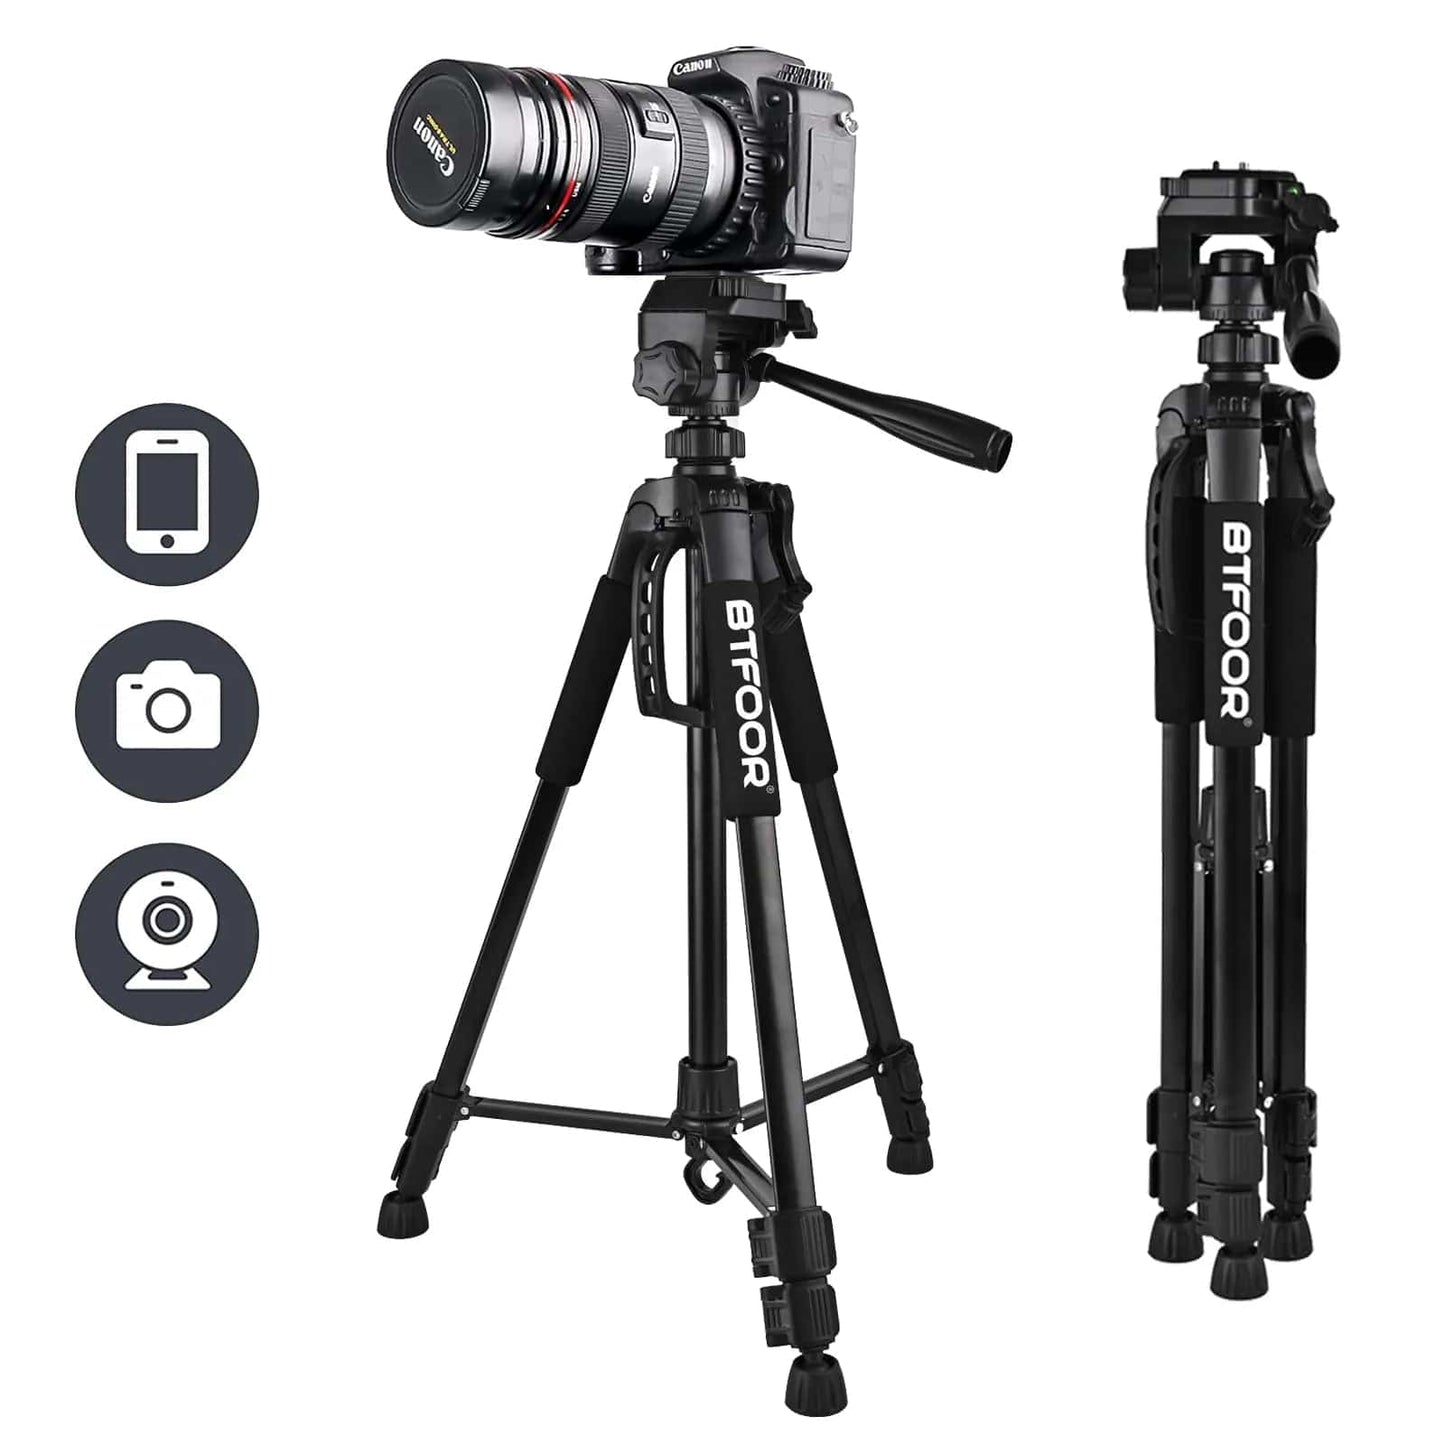 Travel Digital Camera Tripod Professional  Aluminum Tall Phone Stand With Quick Plates Mount Pan Head For DSLR SLR - CLASSY CLOSET BOUTIQUE